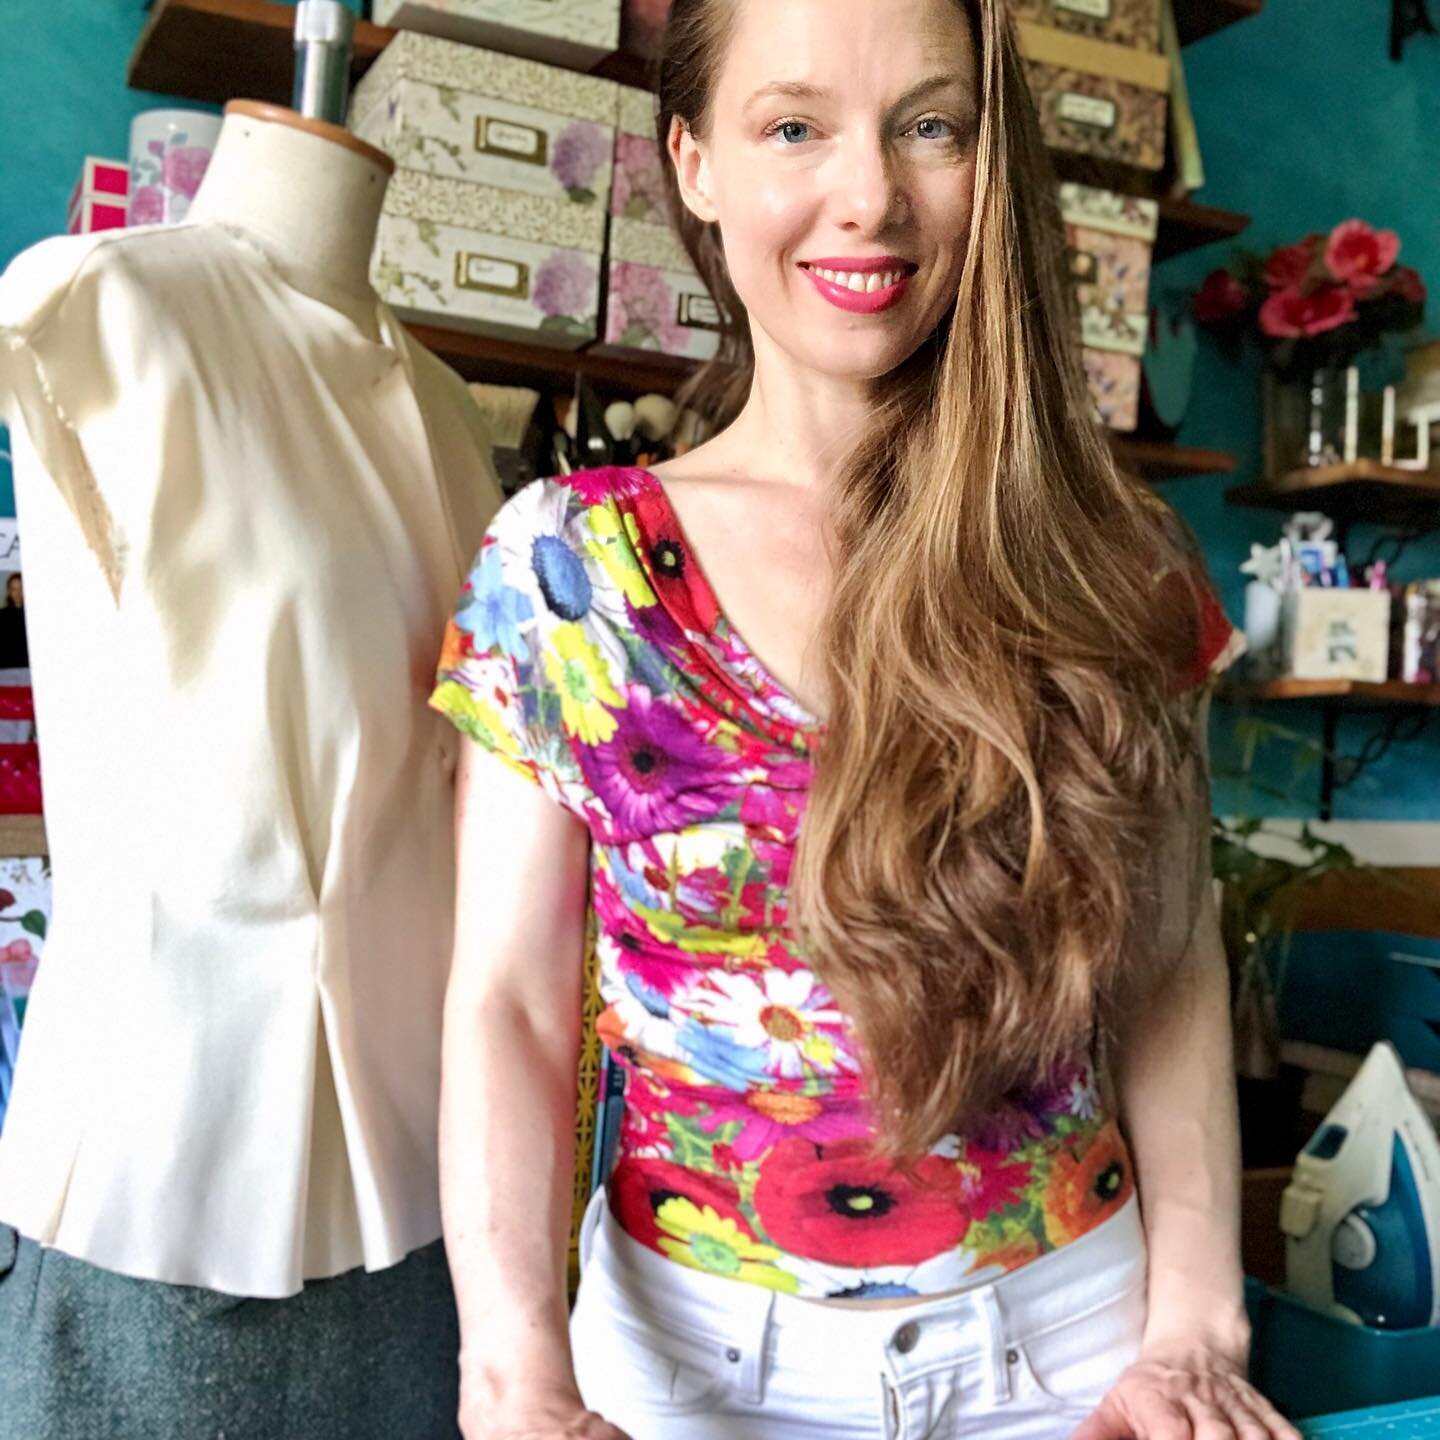 Wear clothes that make you happy. And that feel like you. #sewinglove #instasew #nycdesigner #nycgirl #femme #ladyboss #customclothing #sewinglessons #ootd #styleinspo #floralfashion #behappy